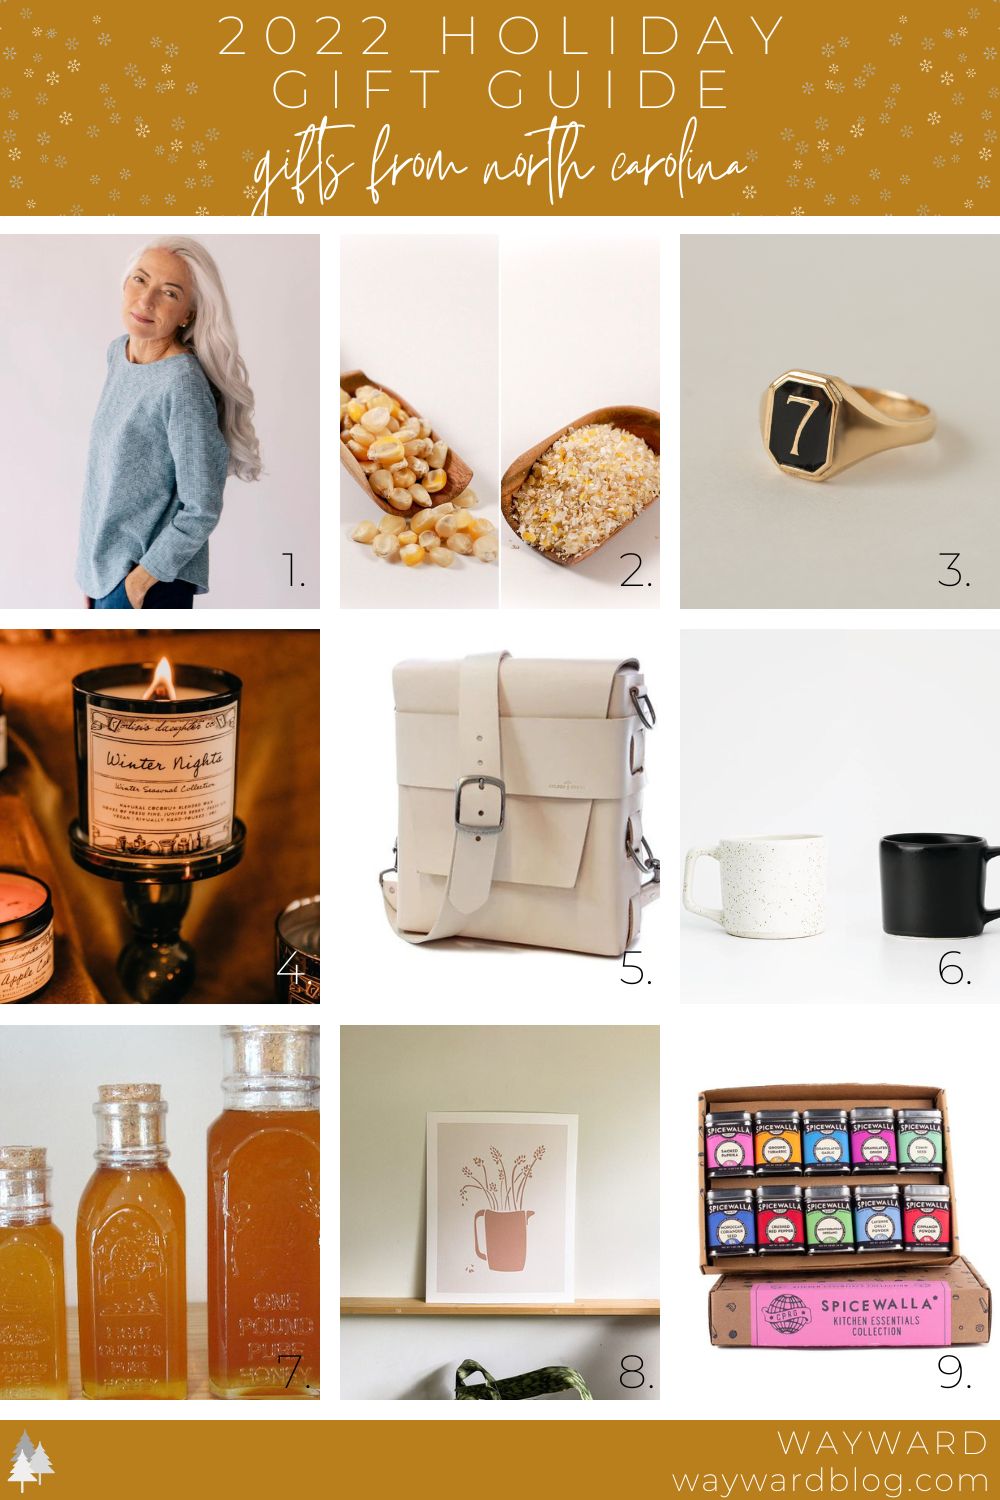 2022 Kitchen Gift Guide: My Top 55 Favorite Kitchen Gifts - a farmgirl's  dabbles